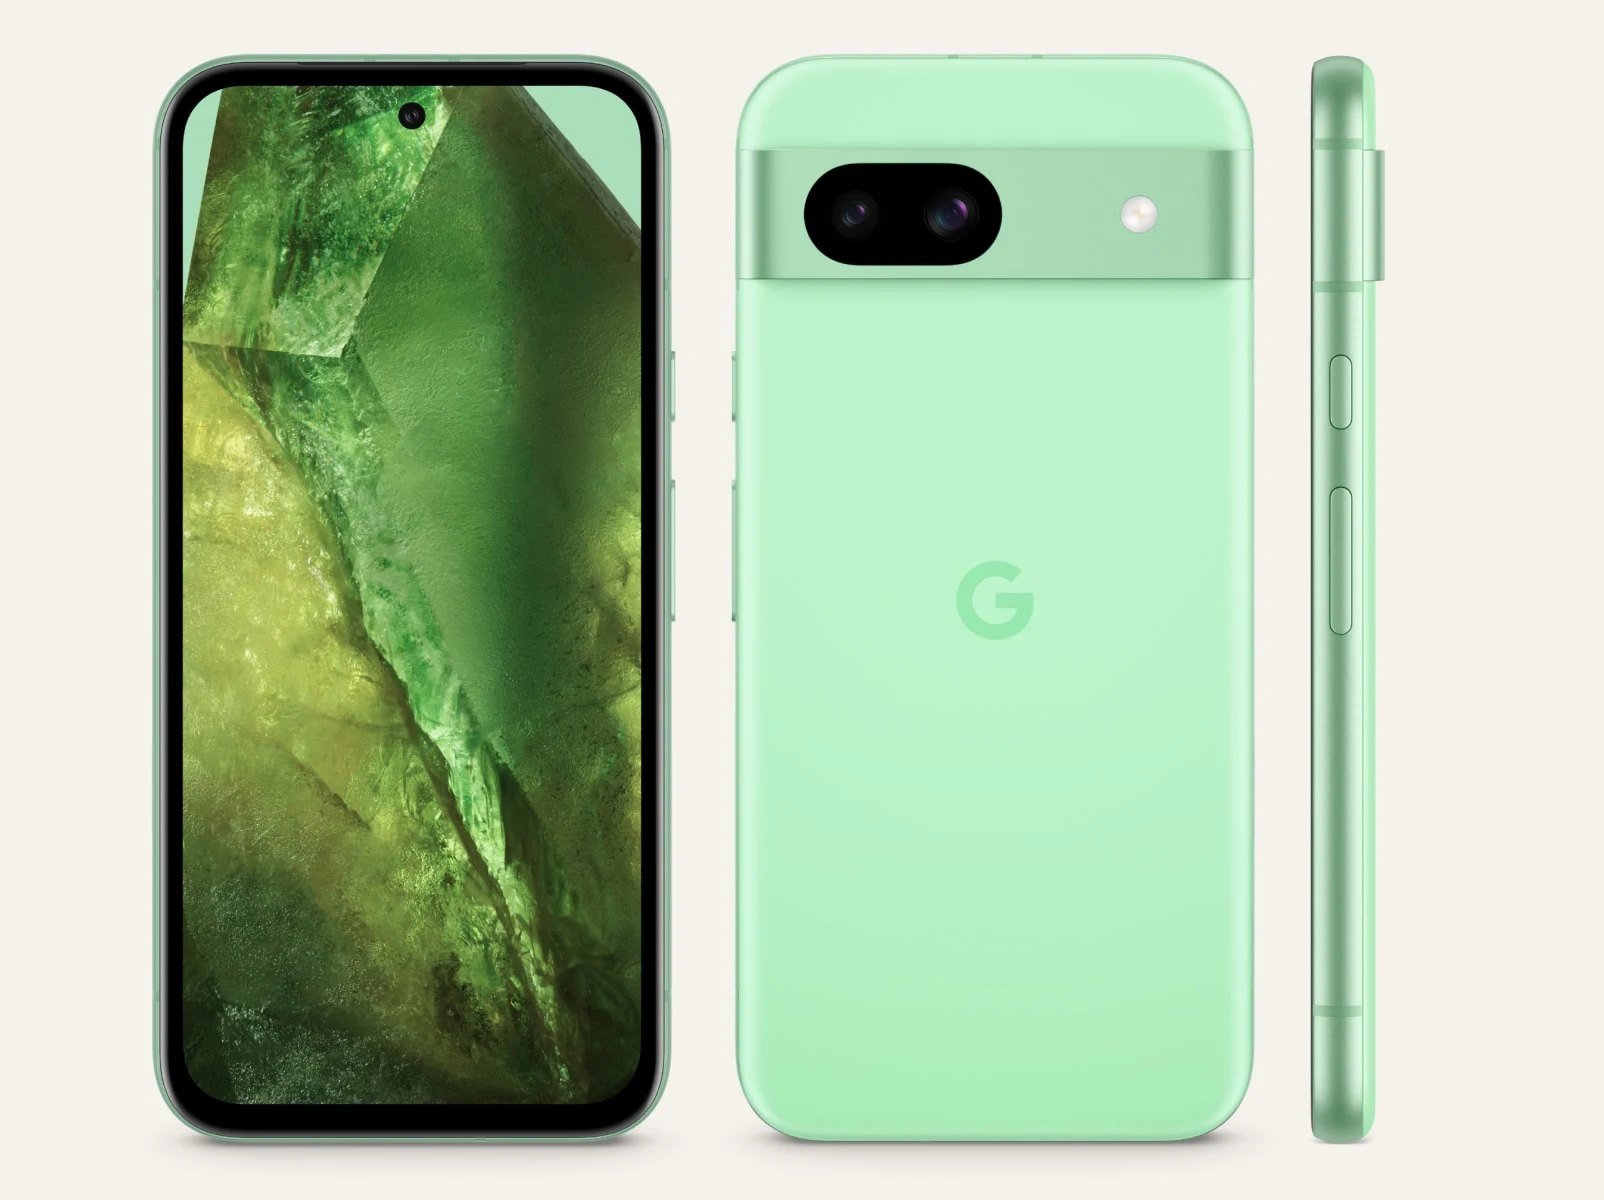 The $499 Google Pixel 8a is official, with 120 Hz display, 7 years of updates